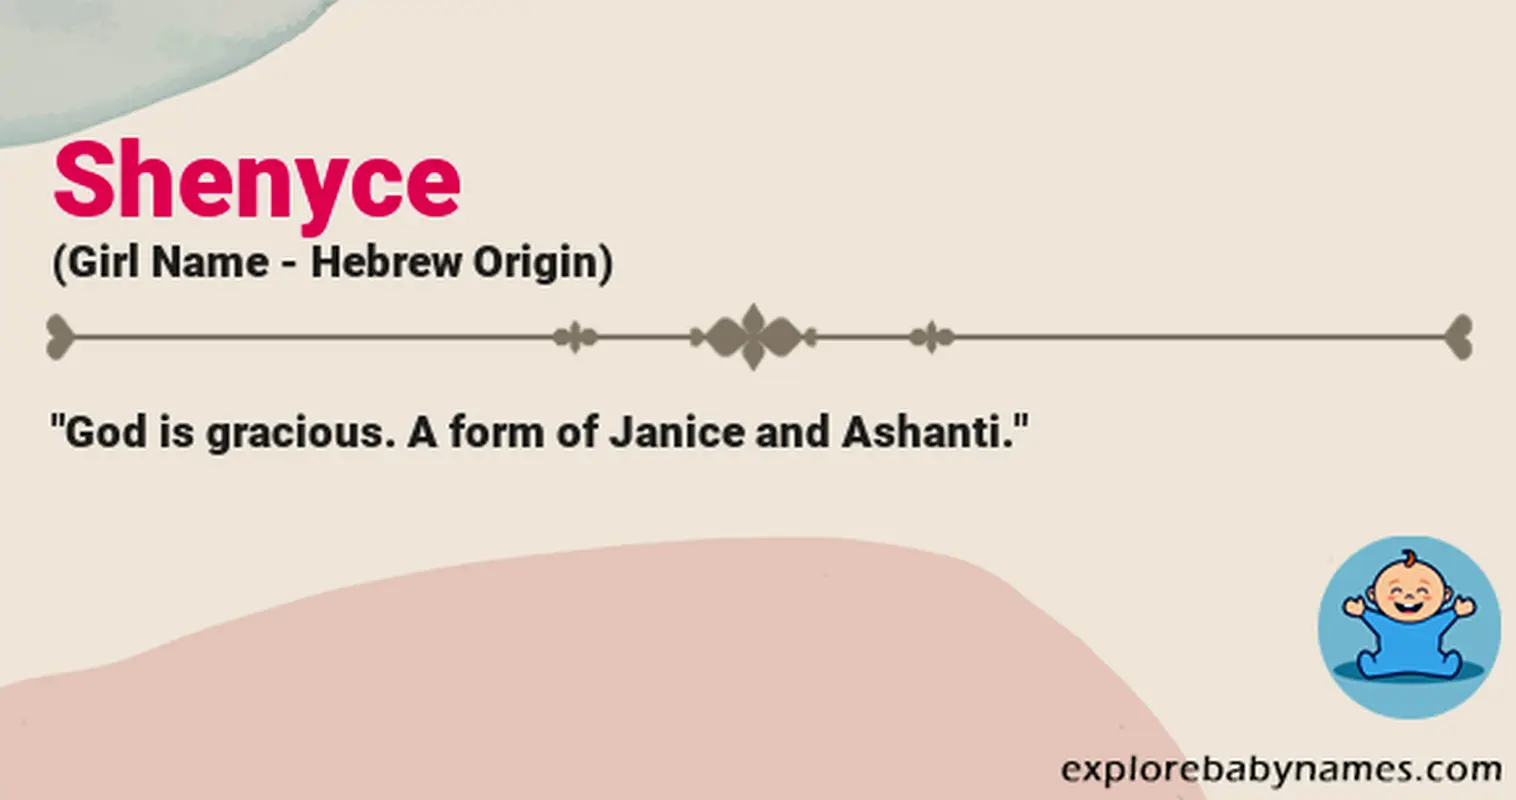 Meaning of Shenyce